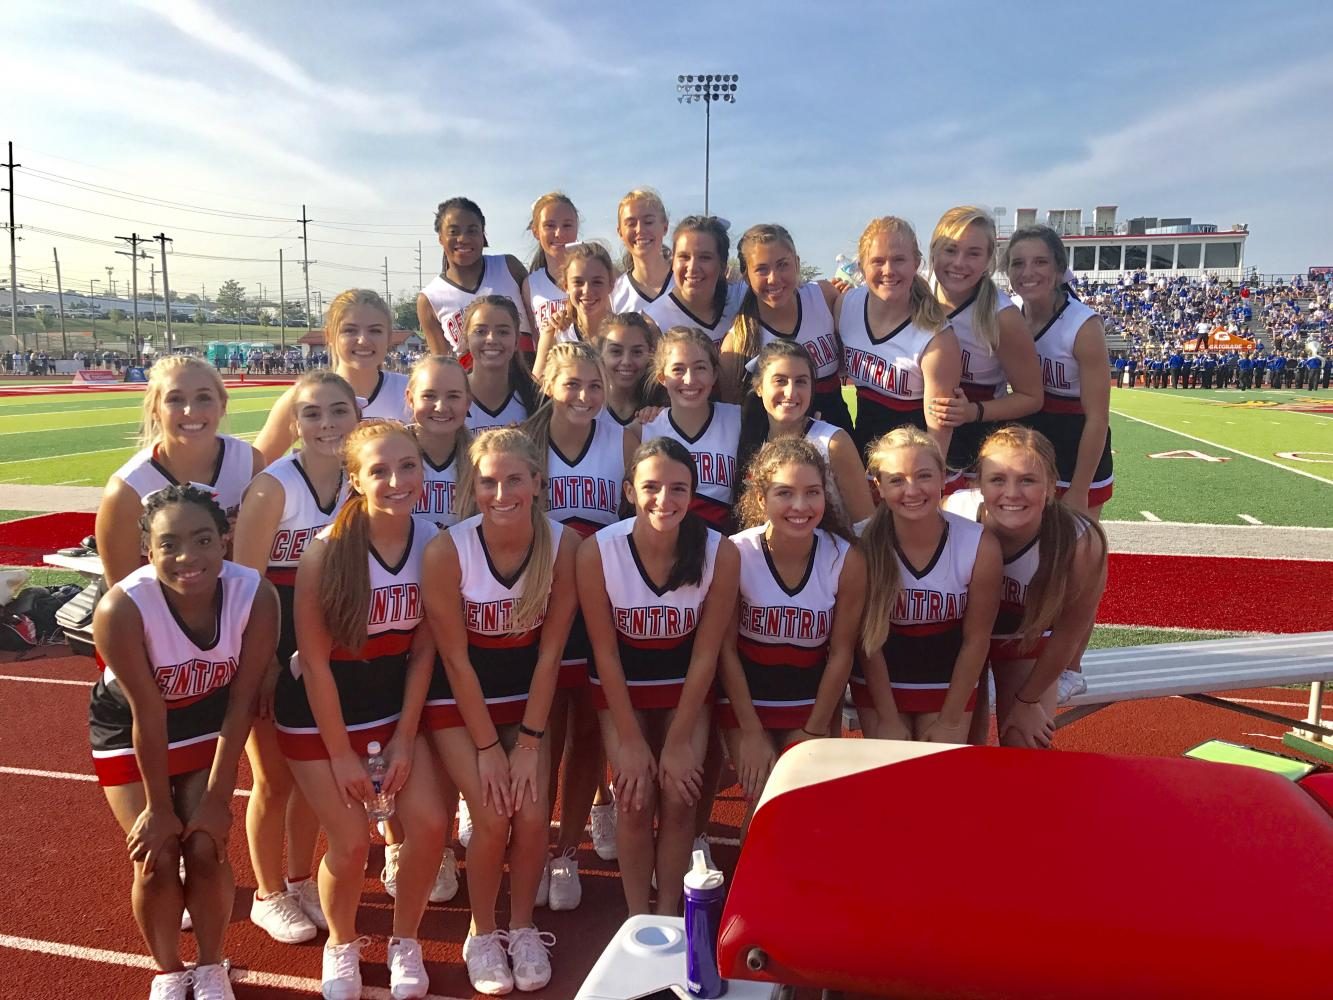 The cheerleaders pose for a picture during the football game on Aug. 26, 2017 at St. Xavier High School (OH). 